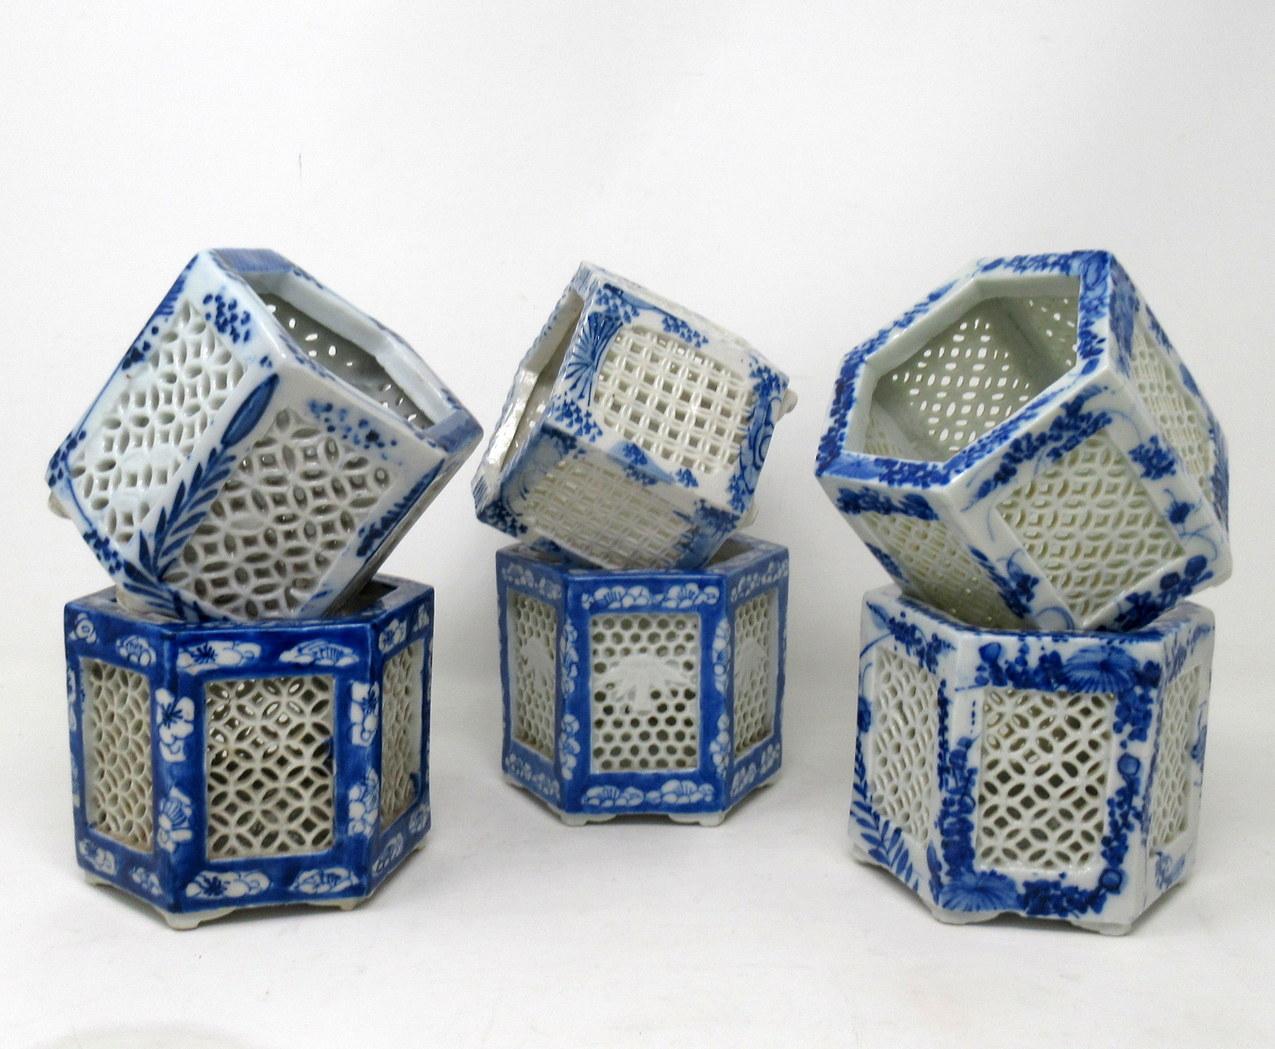 Stylish Assembled v, sometimes referred to as cricket pots or cages. Circa first half of the Twentieth Century. 

Each finely hand decorated on all outer panels depicting flowers and scrolling detail. These pieces are typically unmarked.